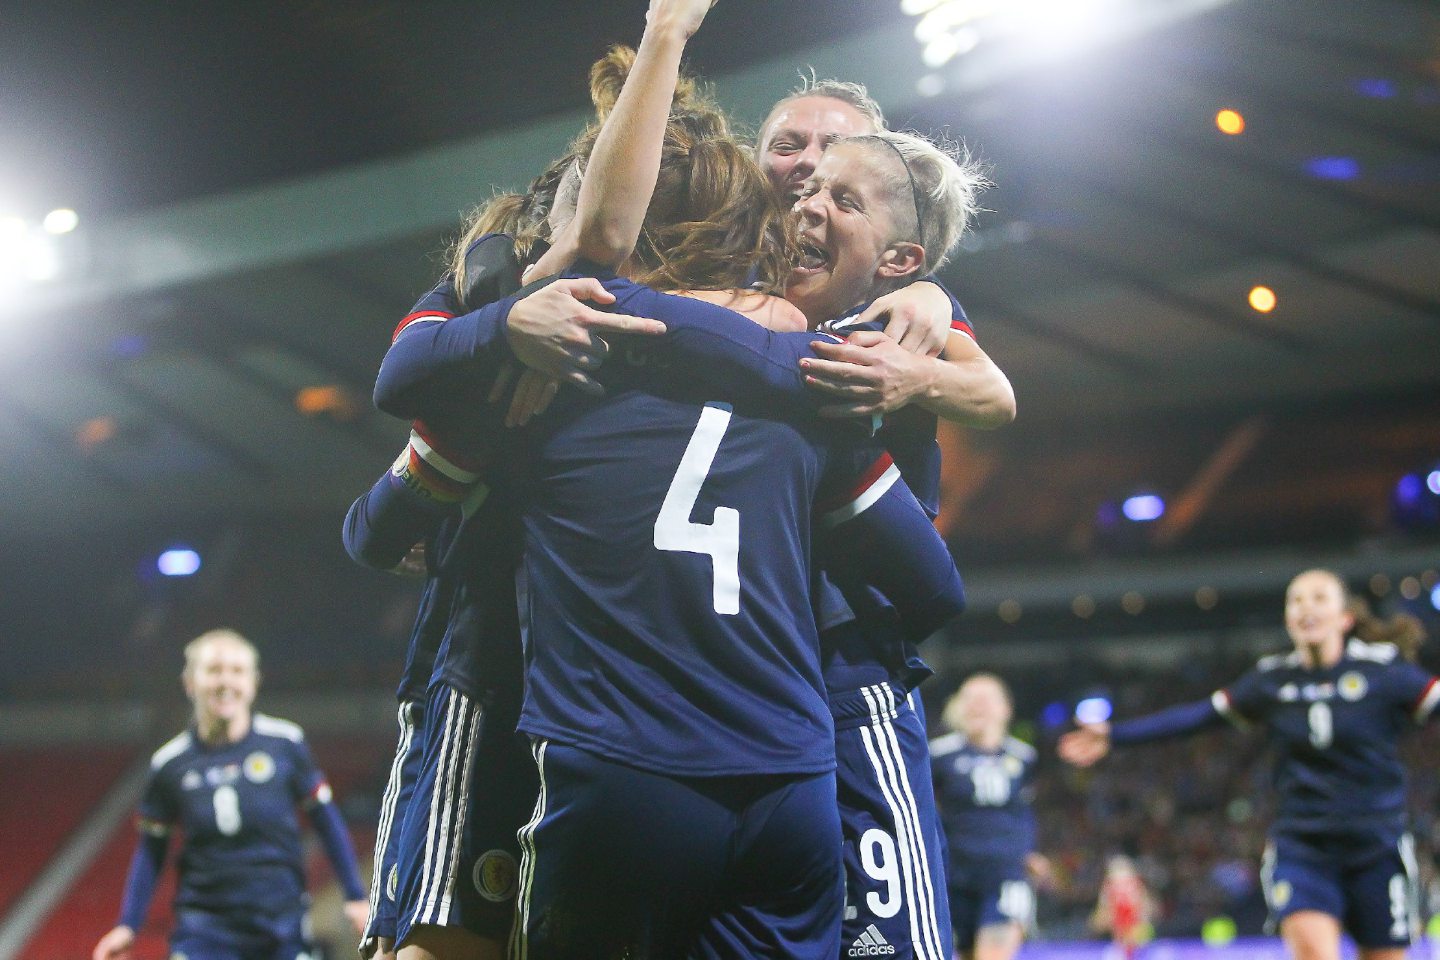 The Scotland team celebrating with teammates during the world cup